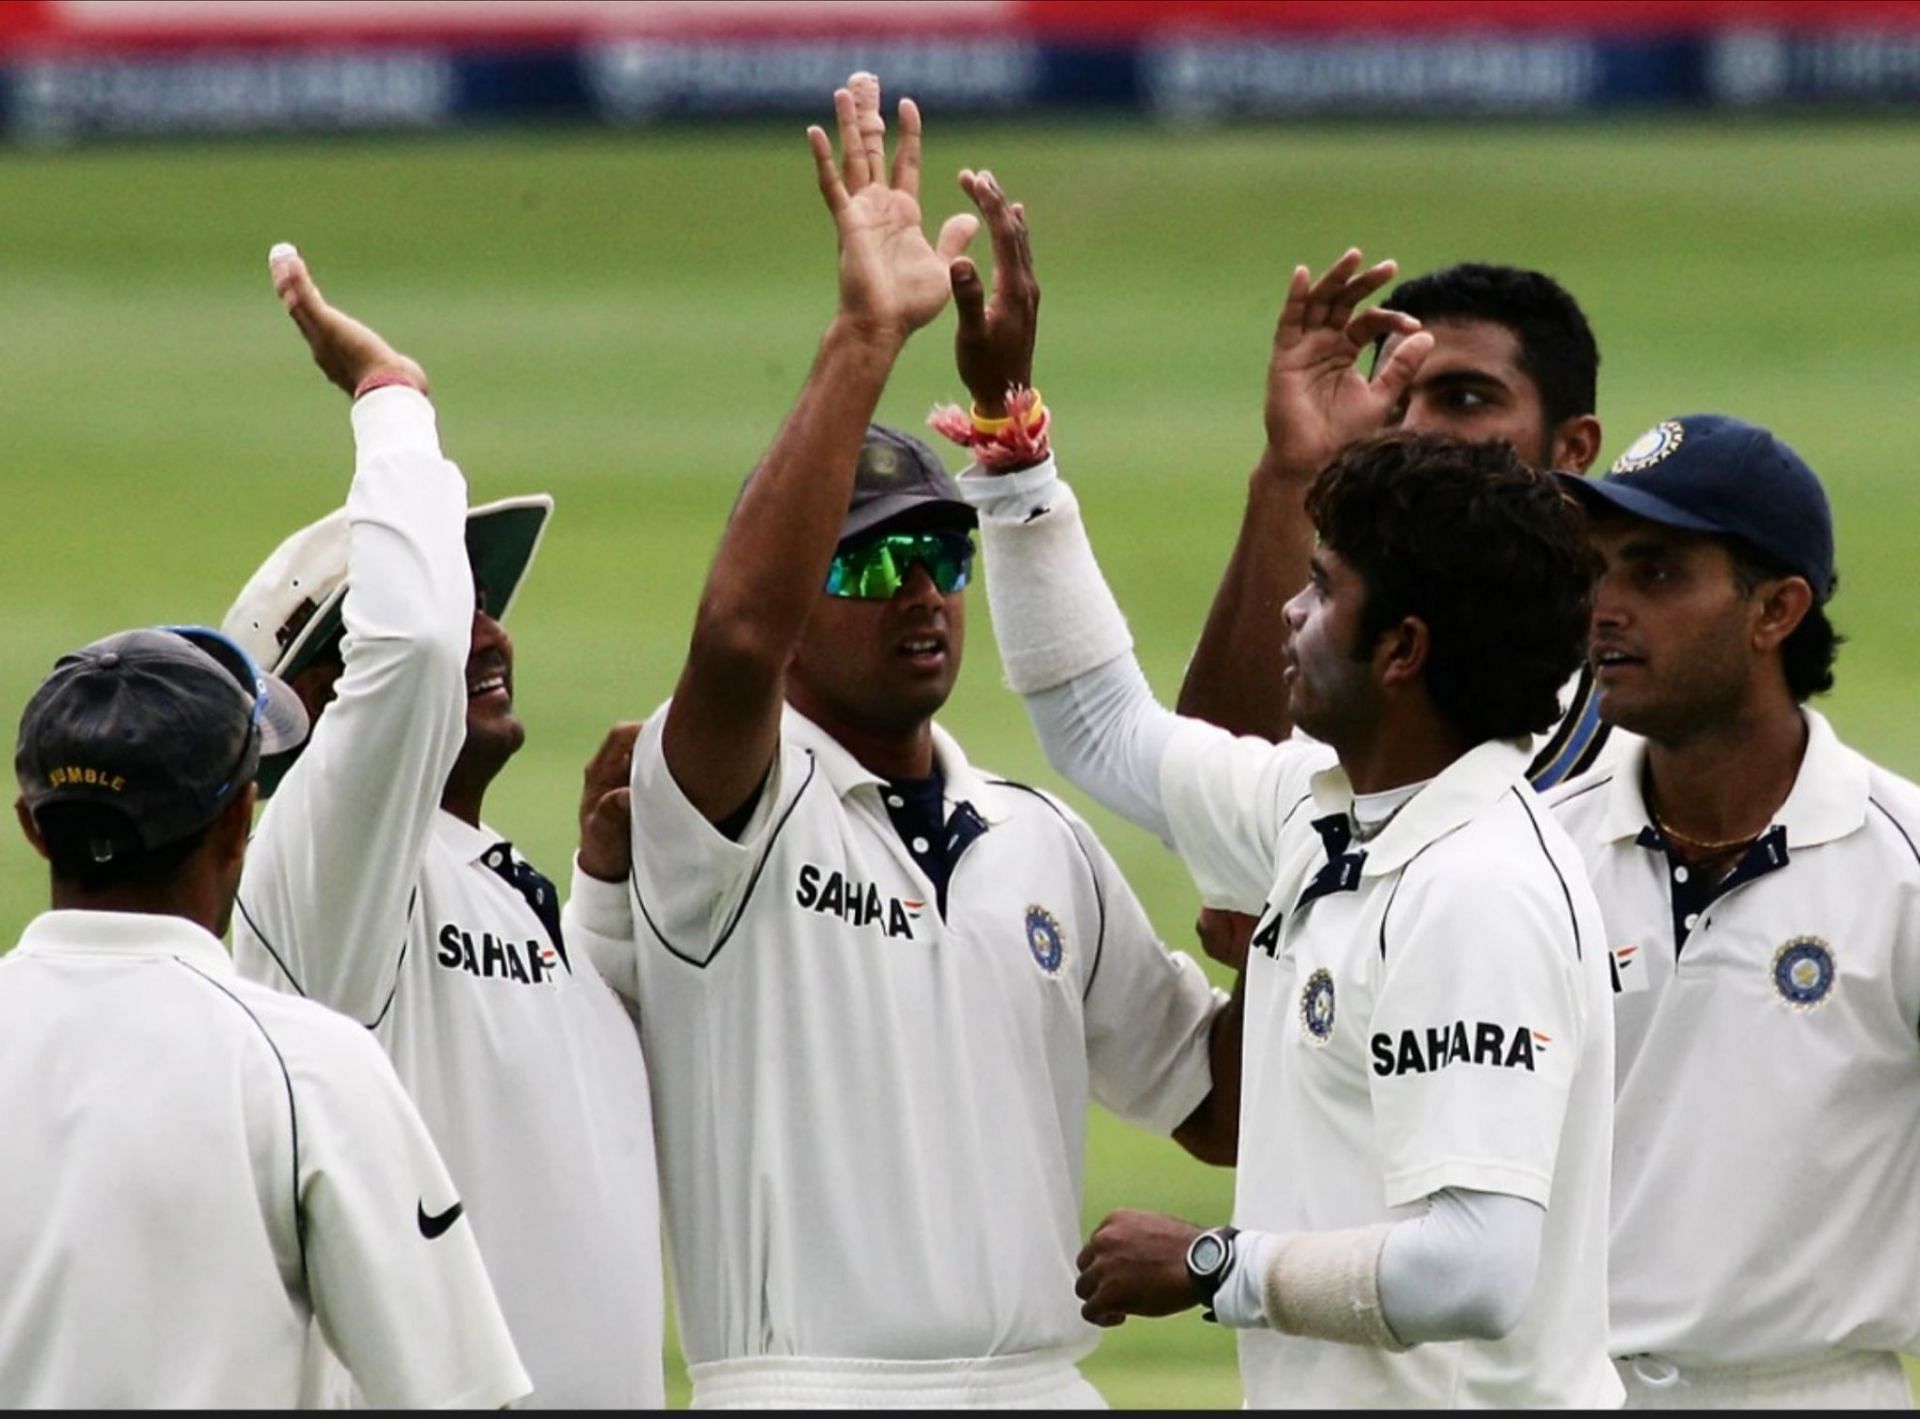 Rahul Dravid and his team vs South Africa in 2006 [Getty Images]